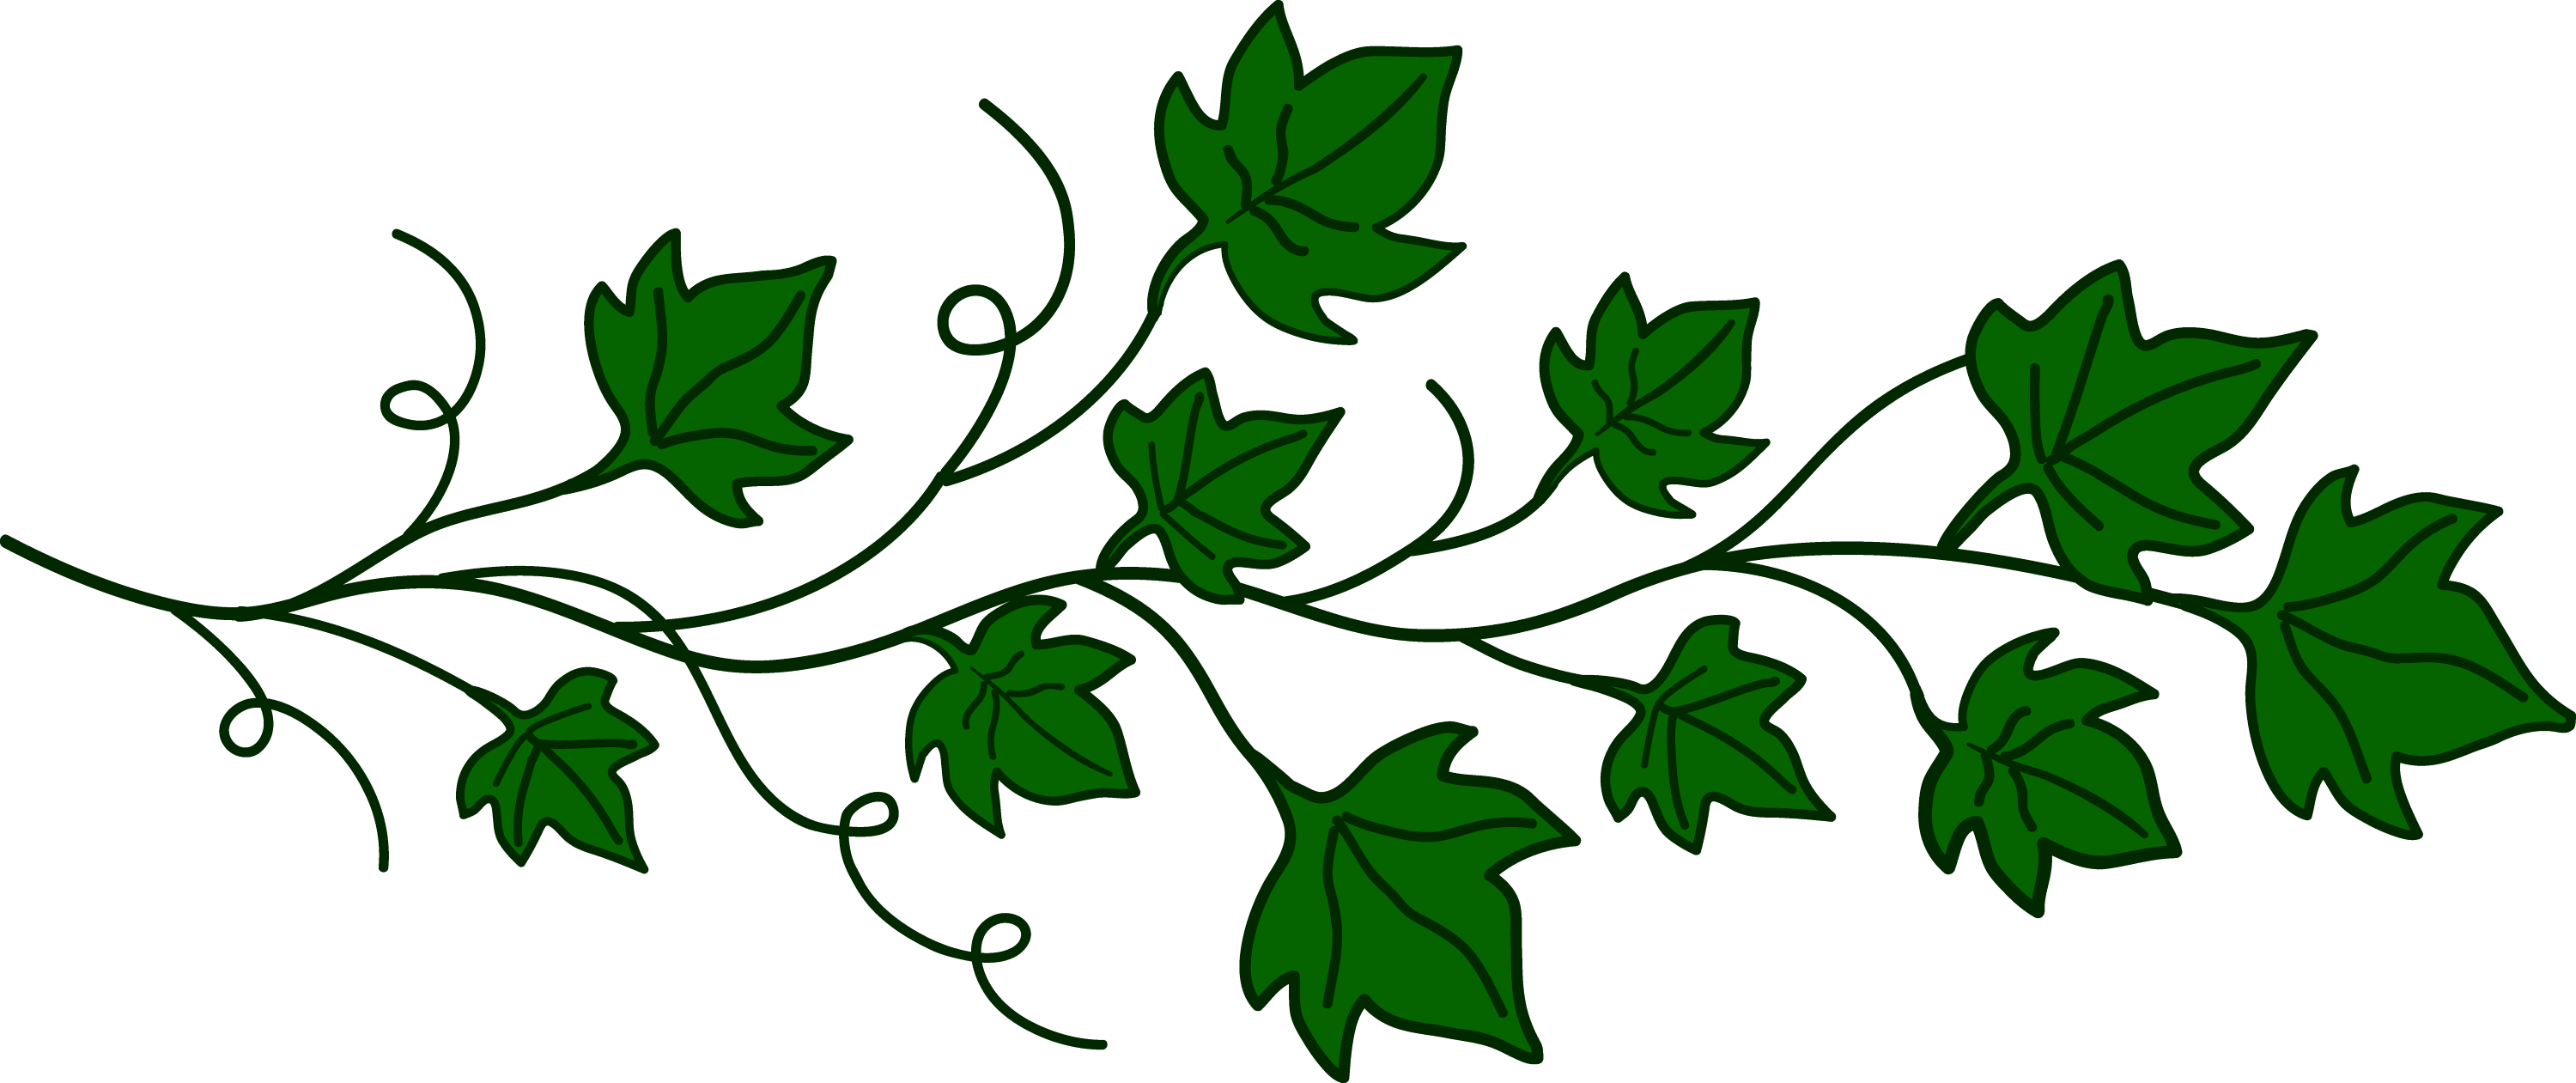 free clip art flowers and vines - photo #30